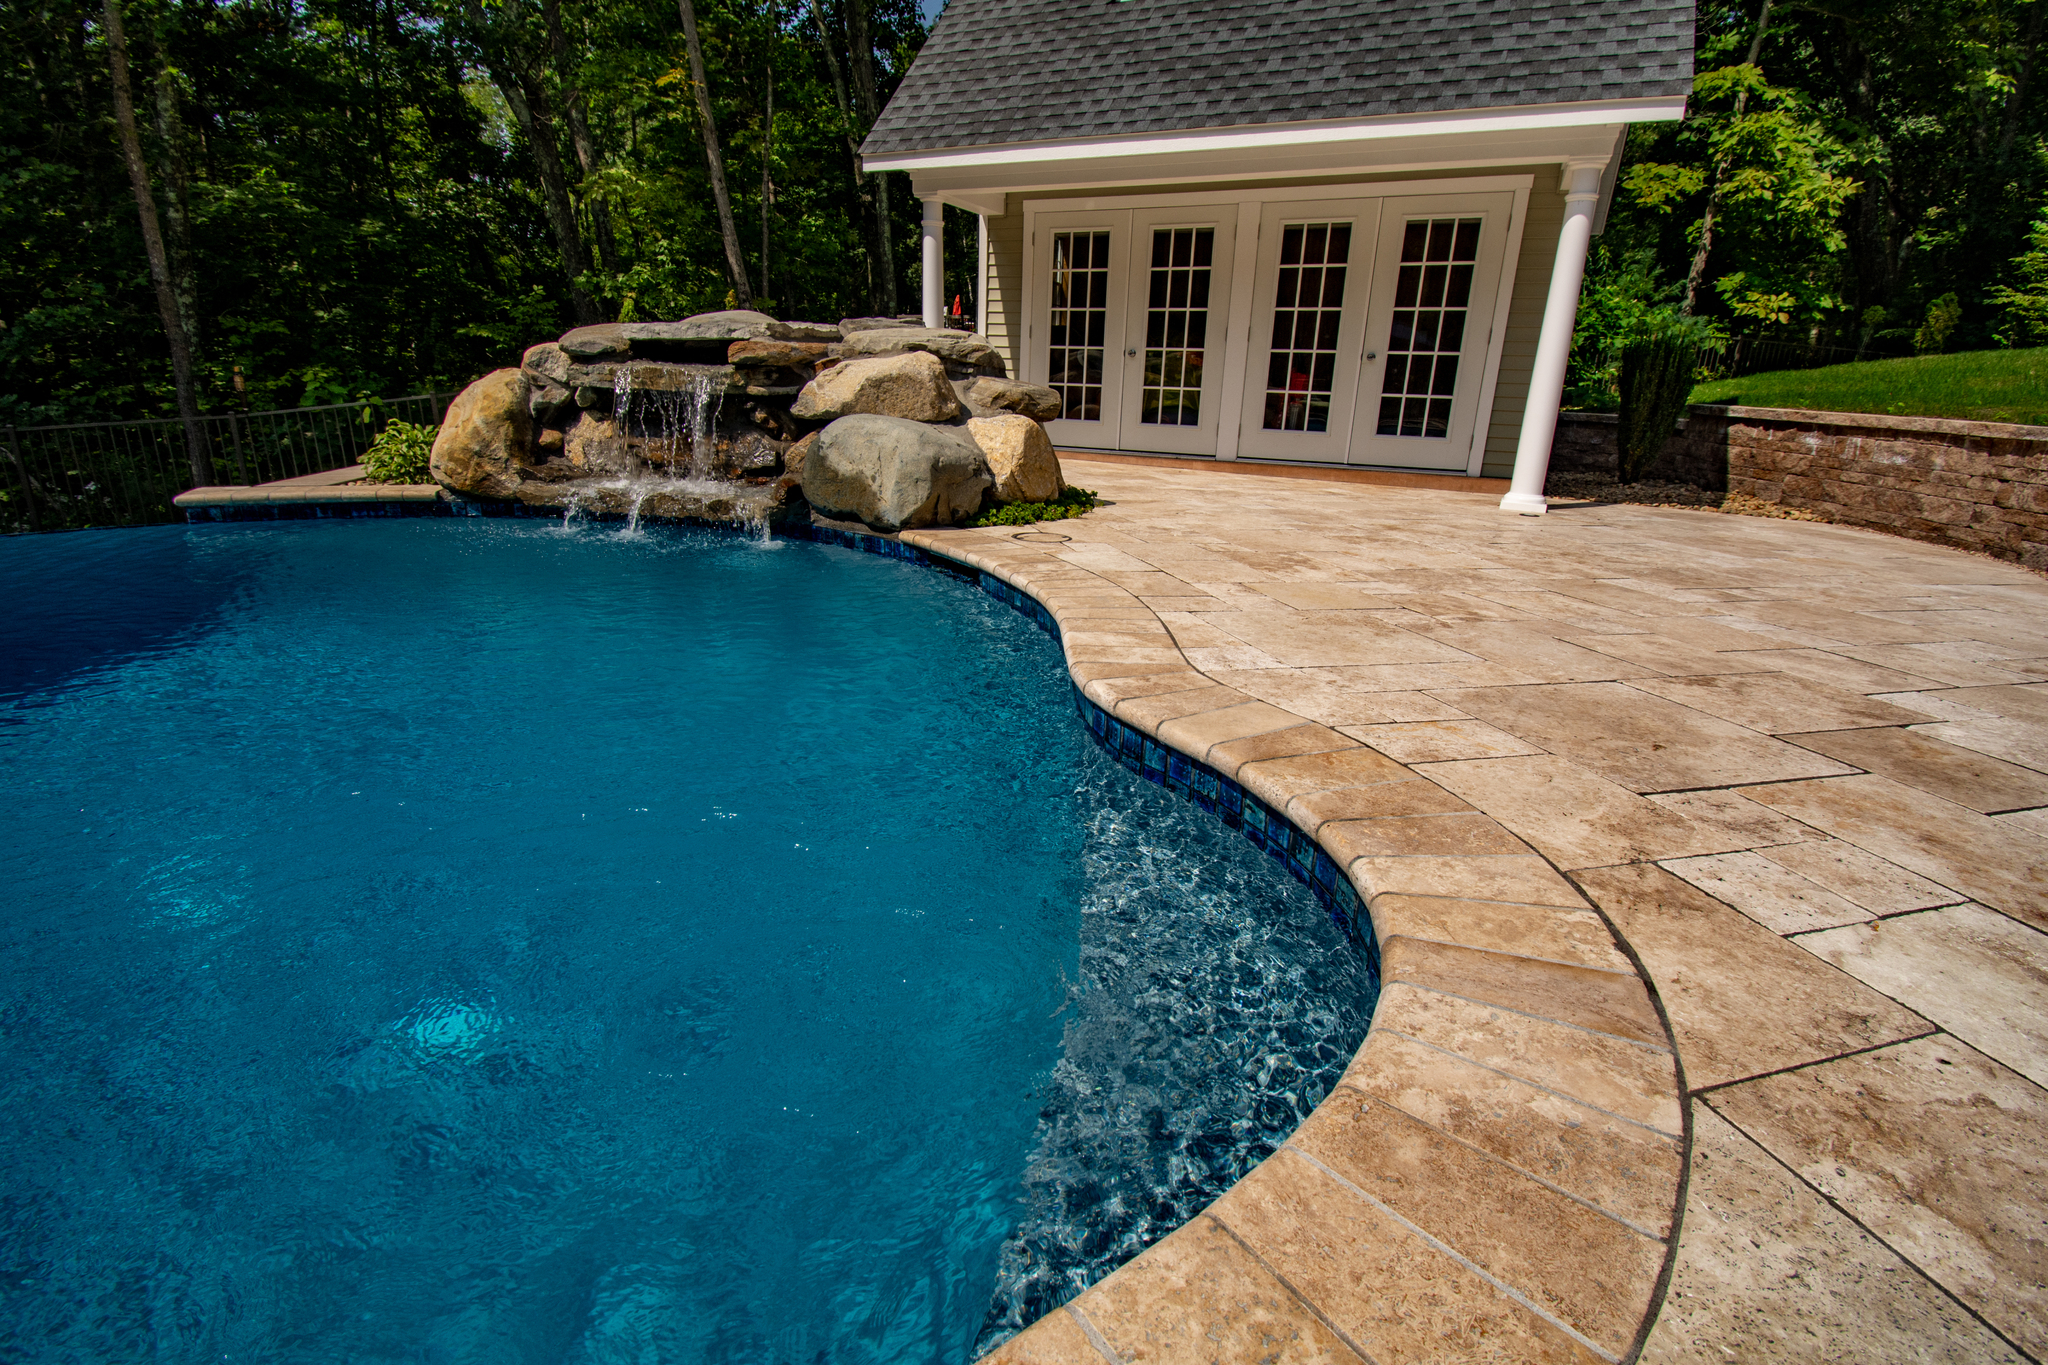 Pool Coping Tile Triad Associates, Tile For Pools